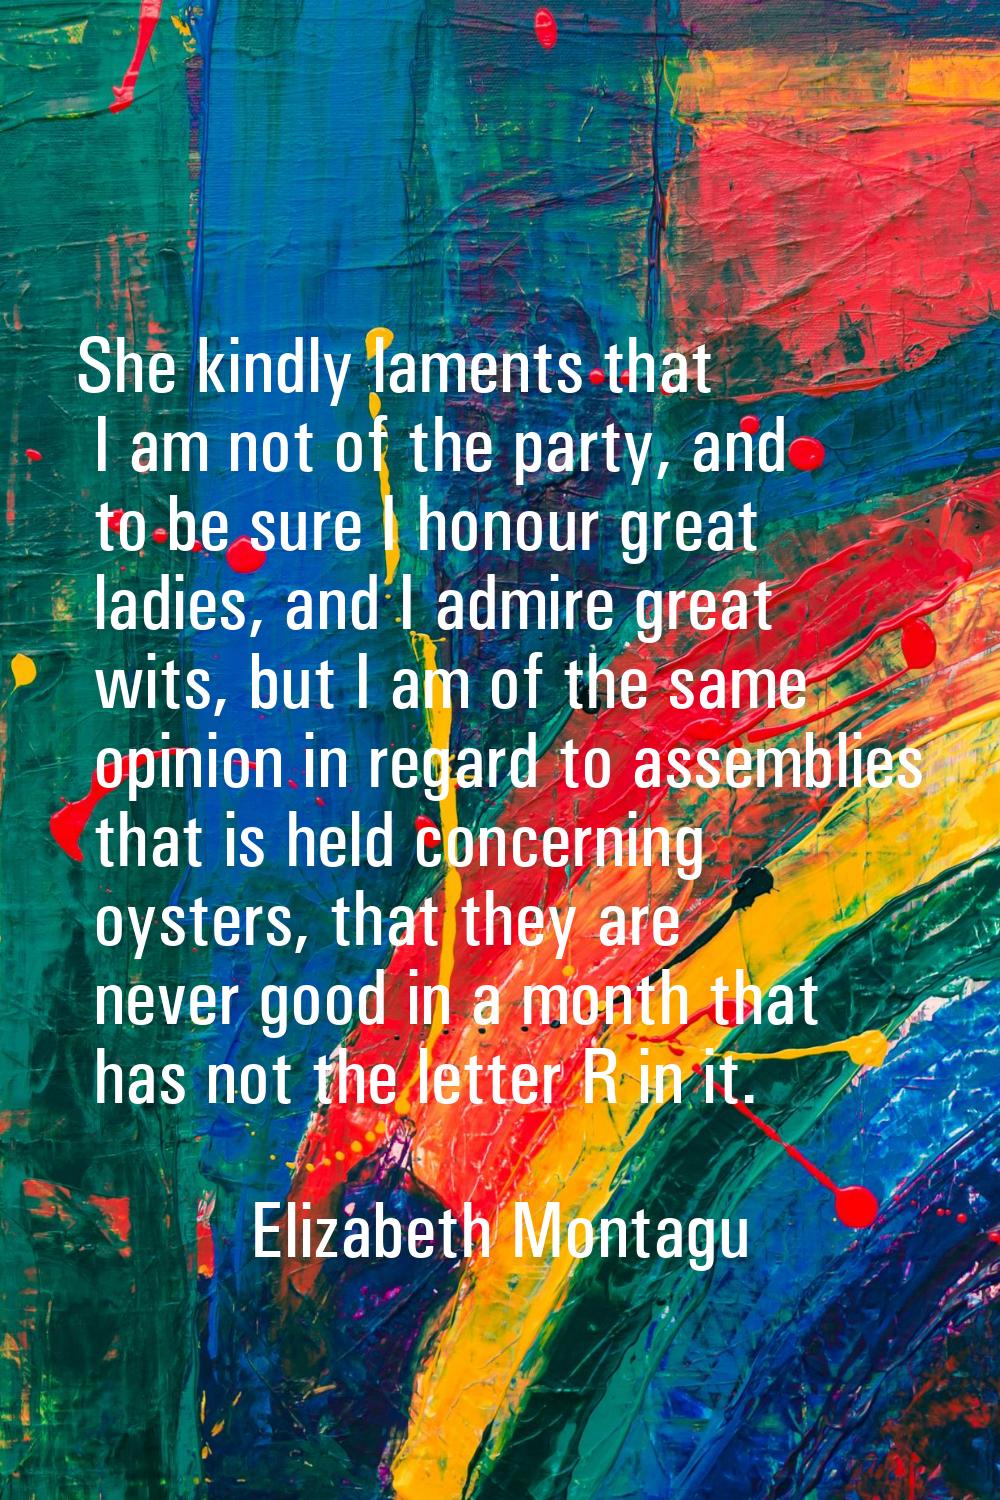 She kindly laments that I am not of the party, and to be sure I honour great ladies, and I admire g